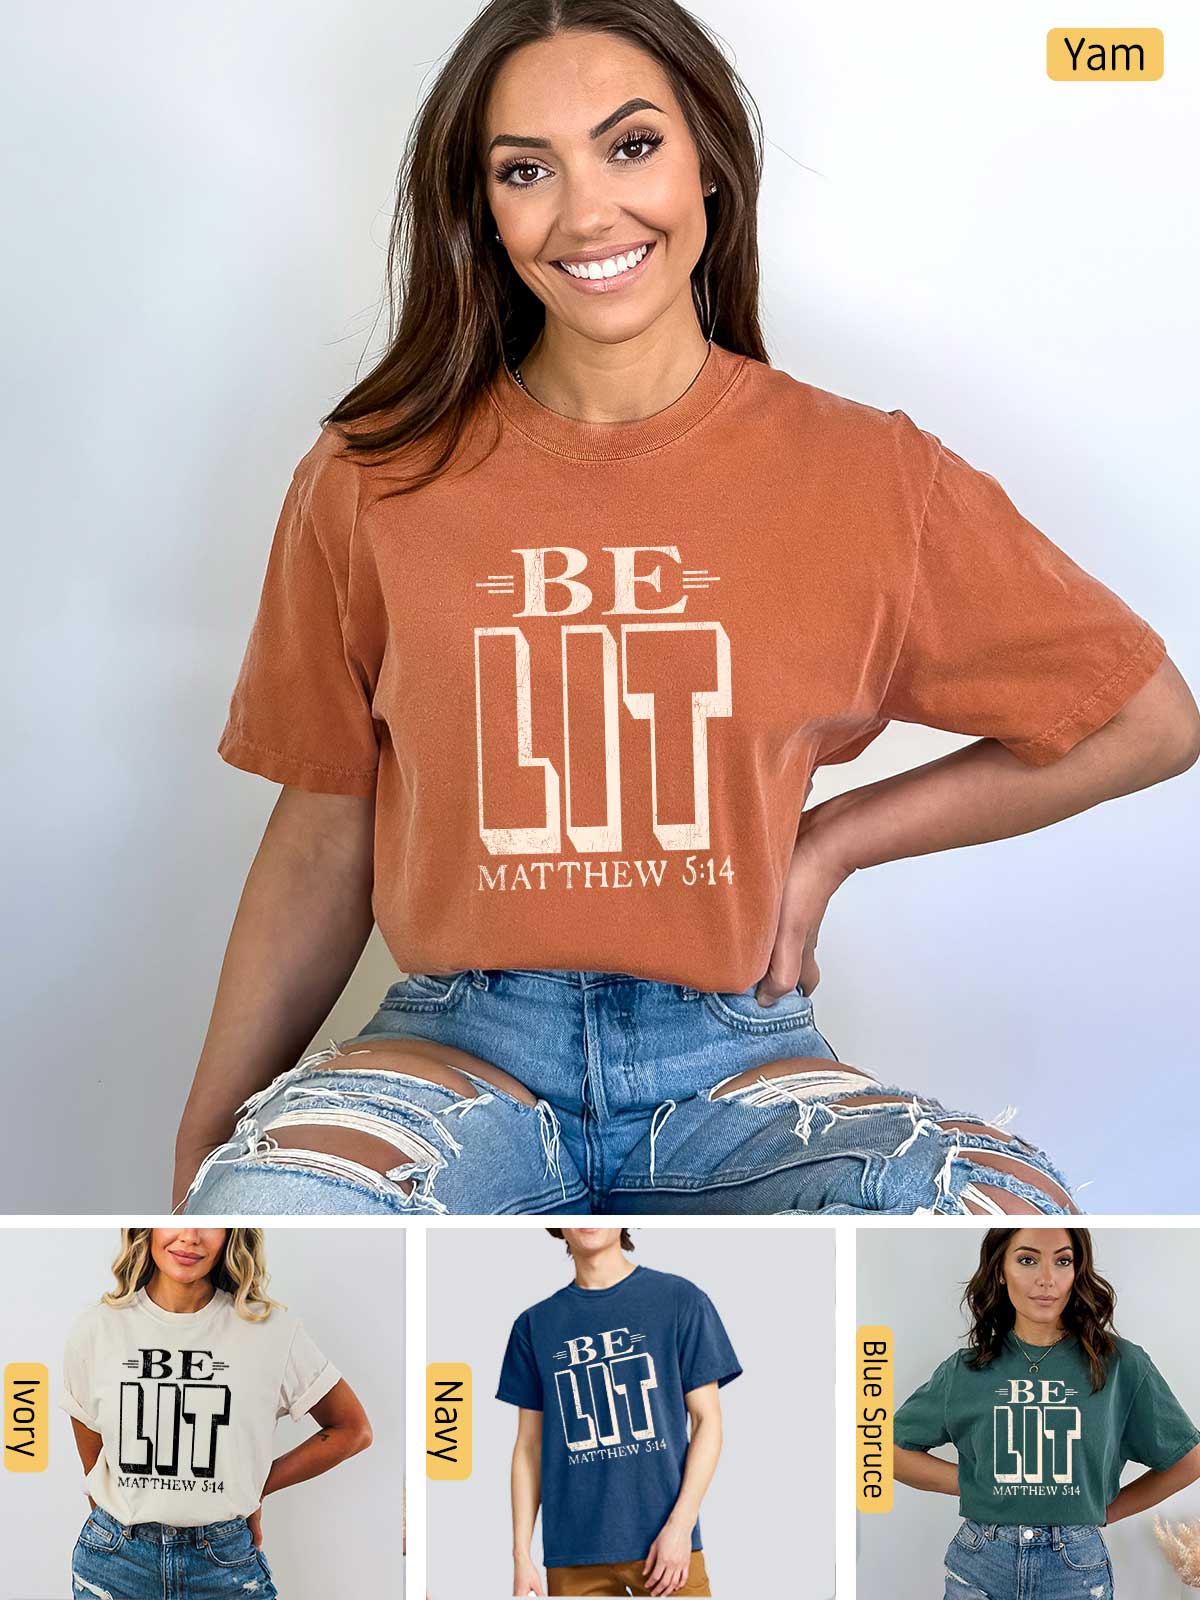 a collage of photos of a woman wearing a t - shirt that says be